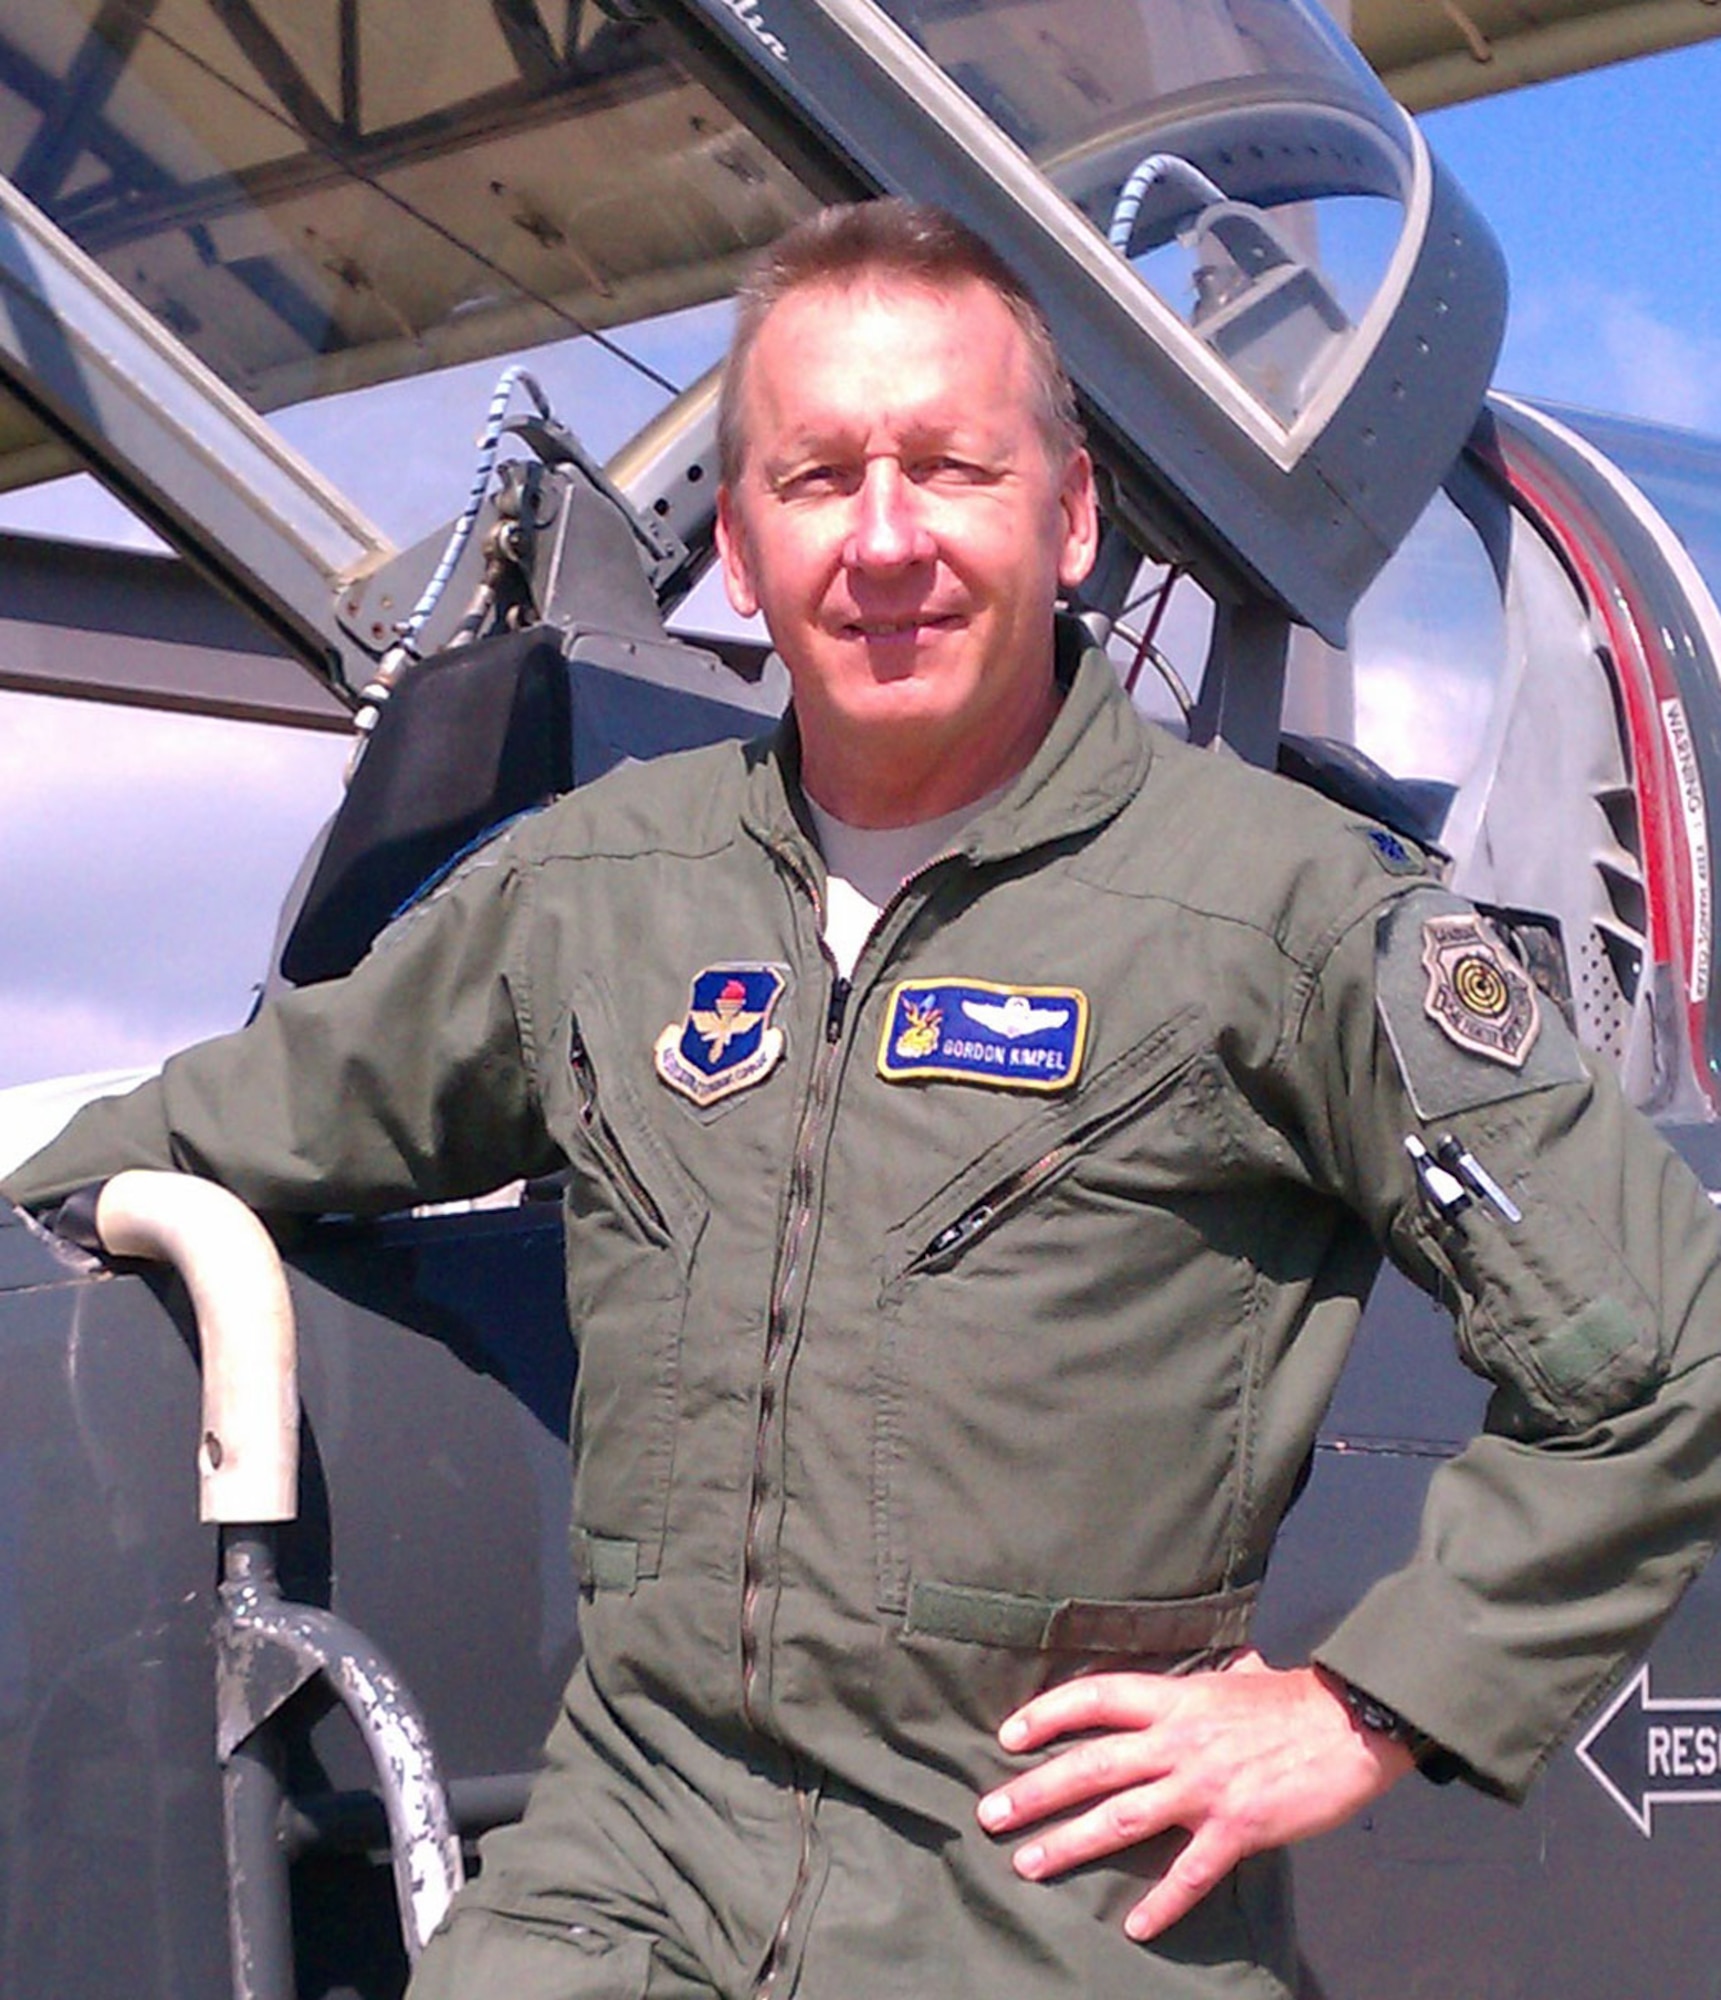 Lt. Col. Gordon P. Kimpel is a T-38C Talon instructor pilot with the 50th Flying Training Squadron at Columbus AFB, Miss. At 59, he is the Air Force’s oldest active-duty instructor pilot after being recalled as part of the Retired Rated Officer Recall Program. He has more than 3,500 flying hours in the F-15 and F-4 and 600 hours in the T-38. He graduated from undergraduate pilot training at Vance AFB, Okla., in December 1976 and is also a retired Delta Air Lines captain with more than 8,000 commercial flying hours with type ratings in the B-737, B-757, B-767, B-777 and MD-11. (Courtesy photo)